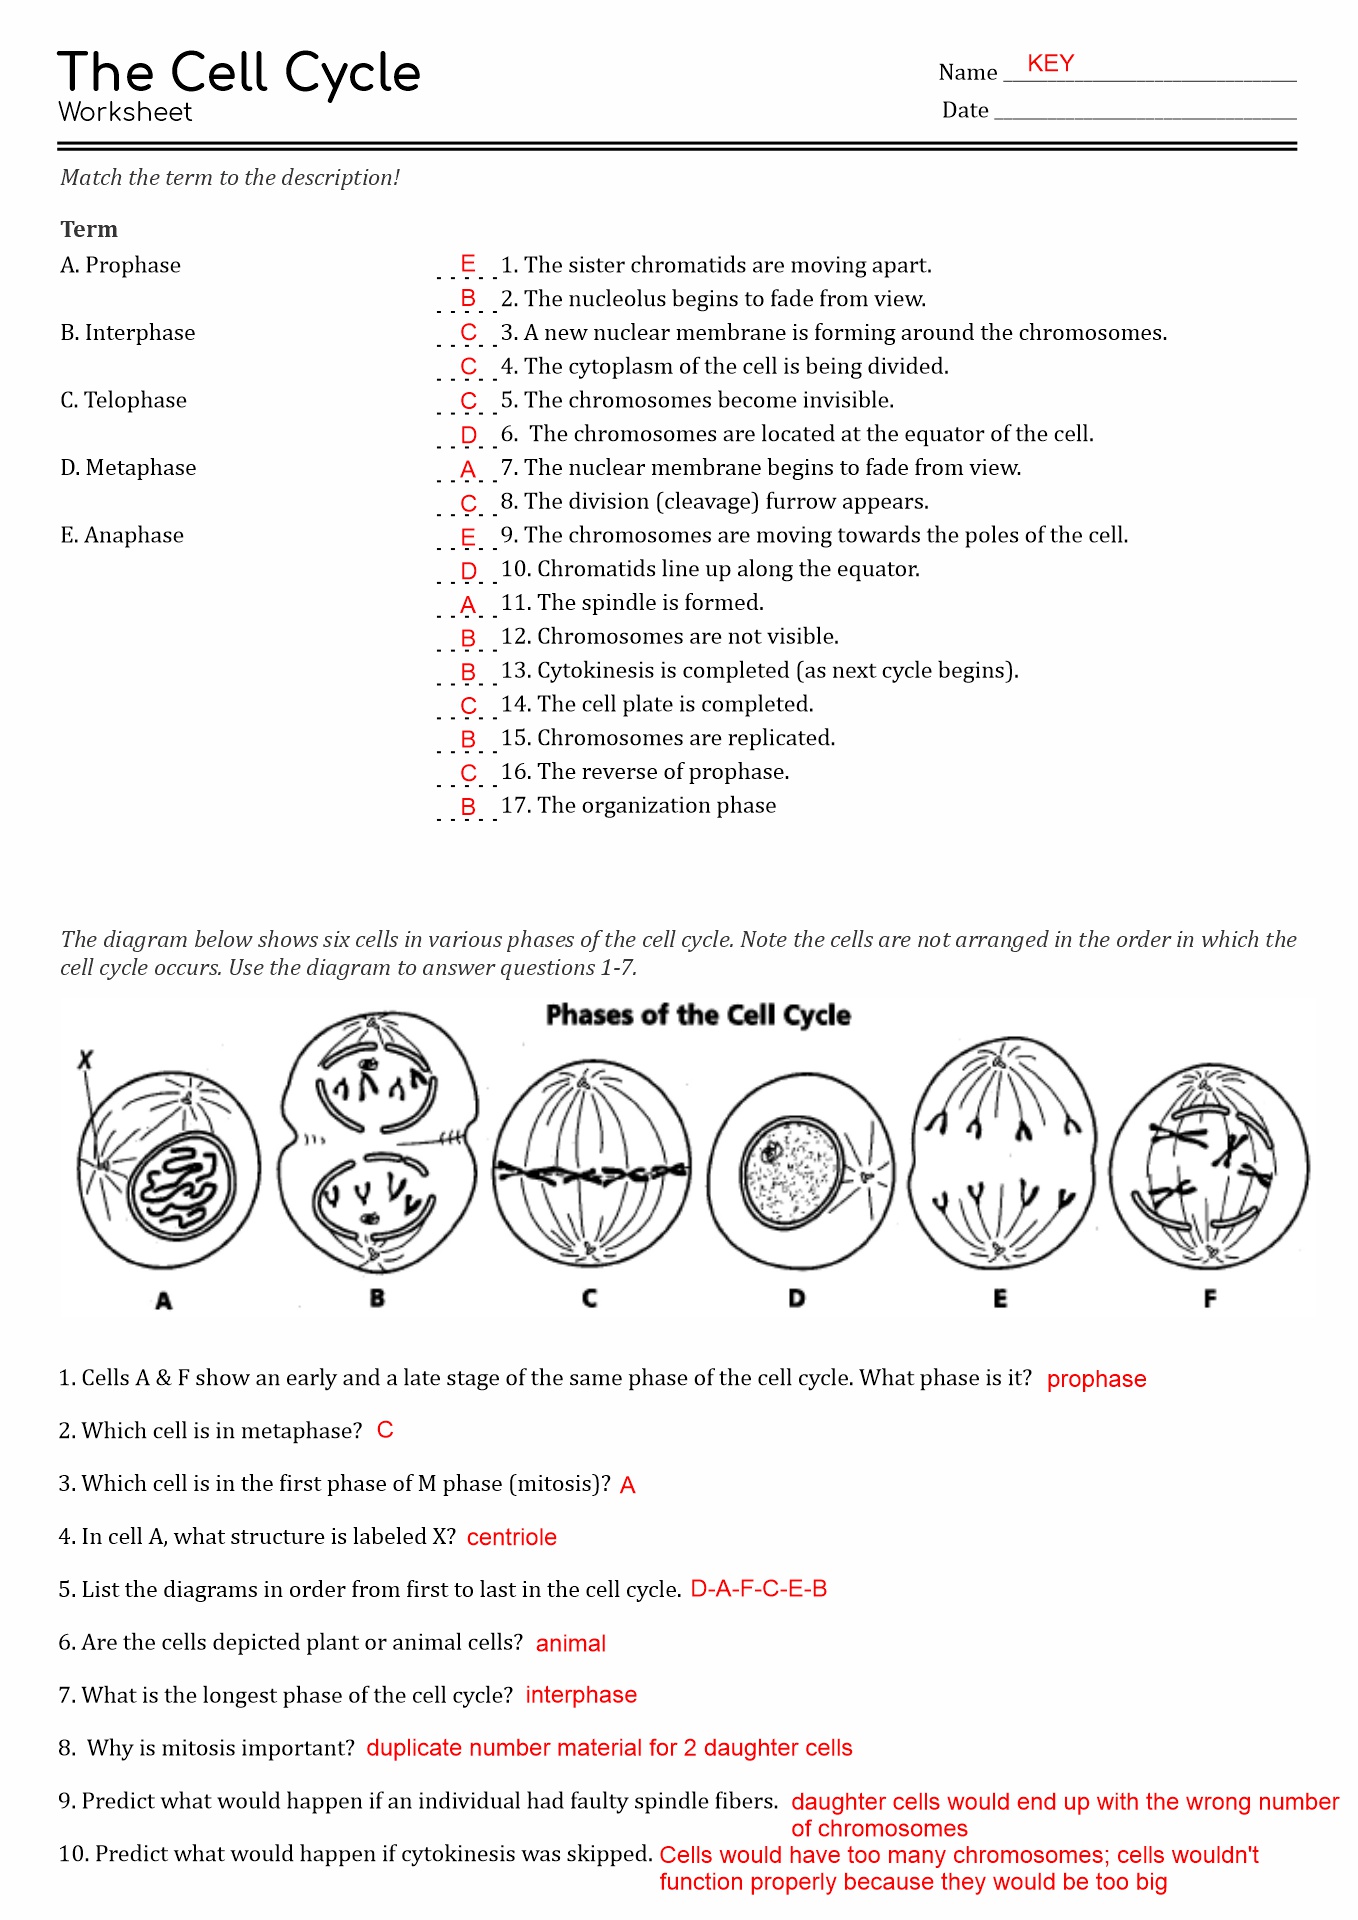 The Cell Cycle Worksheet Answer Key